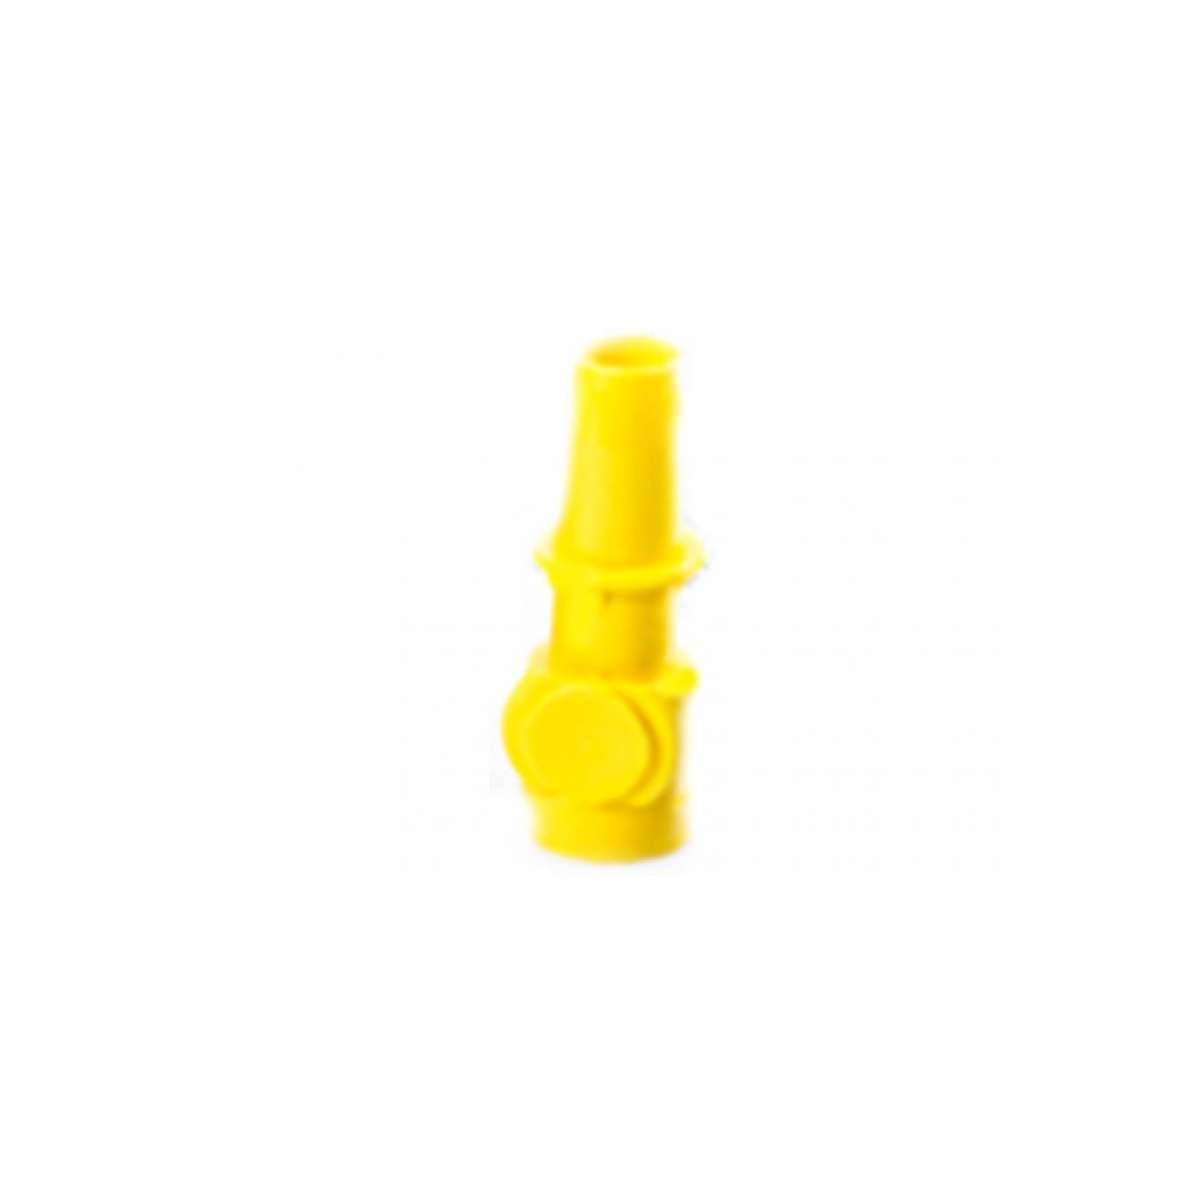 IsoLink 5" Rigid Spout with 1" Tip - Yellow